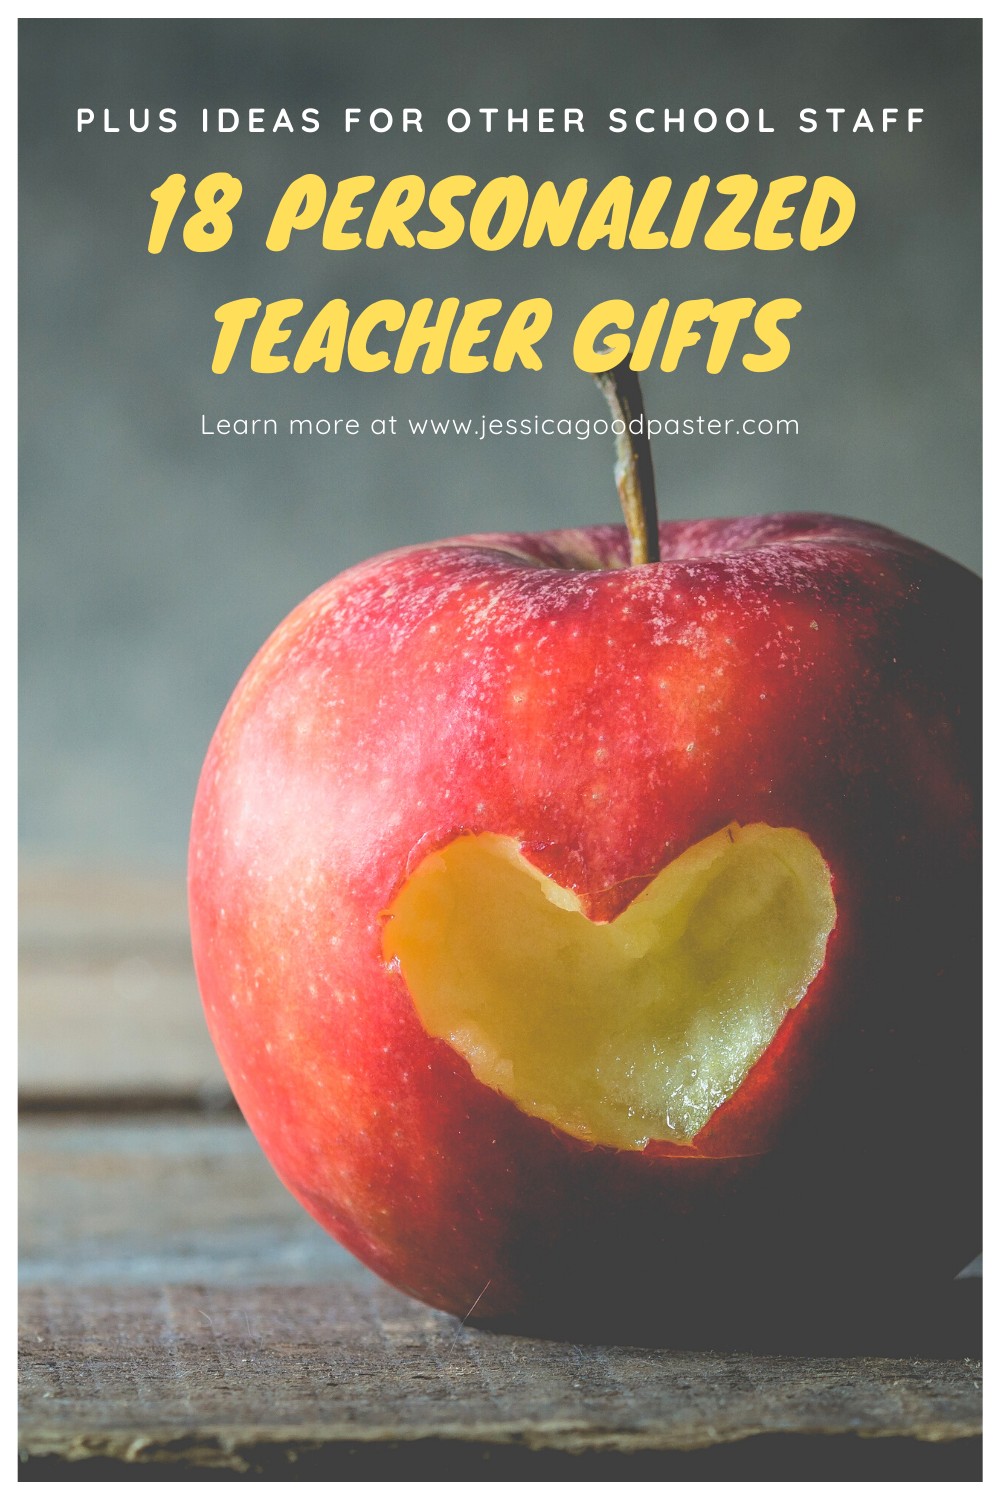 18 Personalized Teacher Appreciation Gifts Plus Ideas for Other School Staff | Great gift ideas for teachers, SLPs, OTs, PTs, counselors, bus drivers, principals, custodians, and other school staff. Find personalized teacher appreciation gifts for every budget. Perfect for teacher appreciation week, end of the year, or just saying thanks. #teachergifts #teacherappreciation #giftideas #teachergiftideas #personalizedgifts #school 